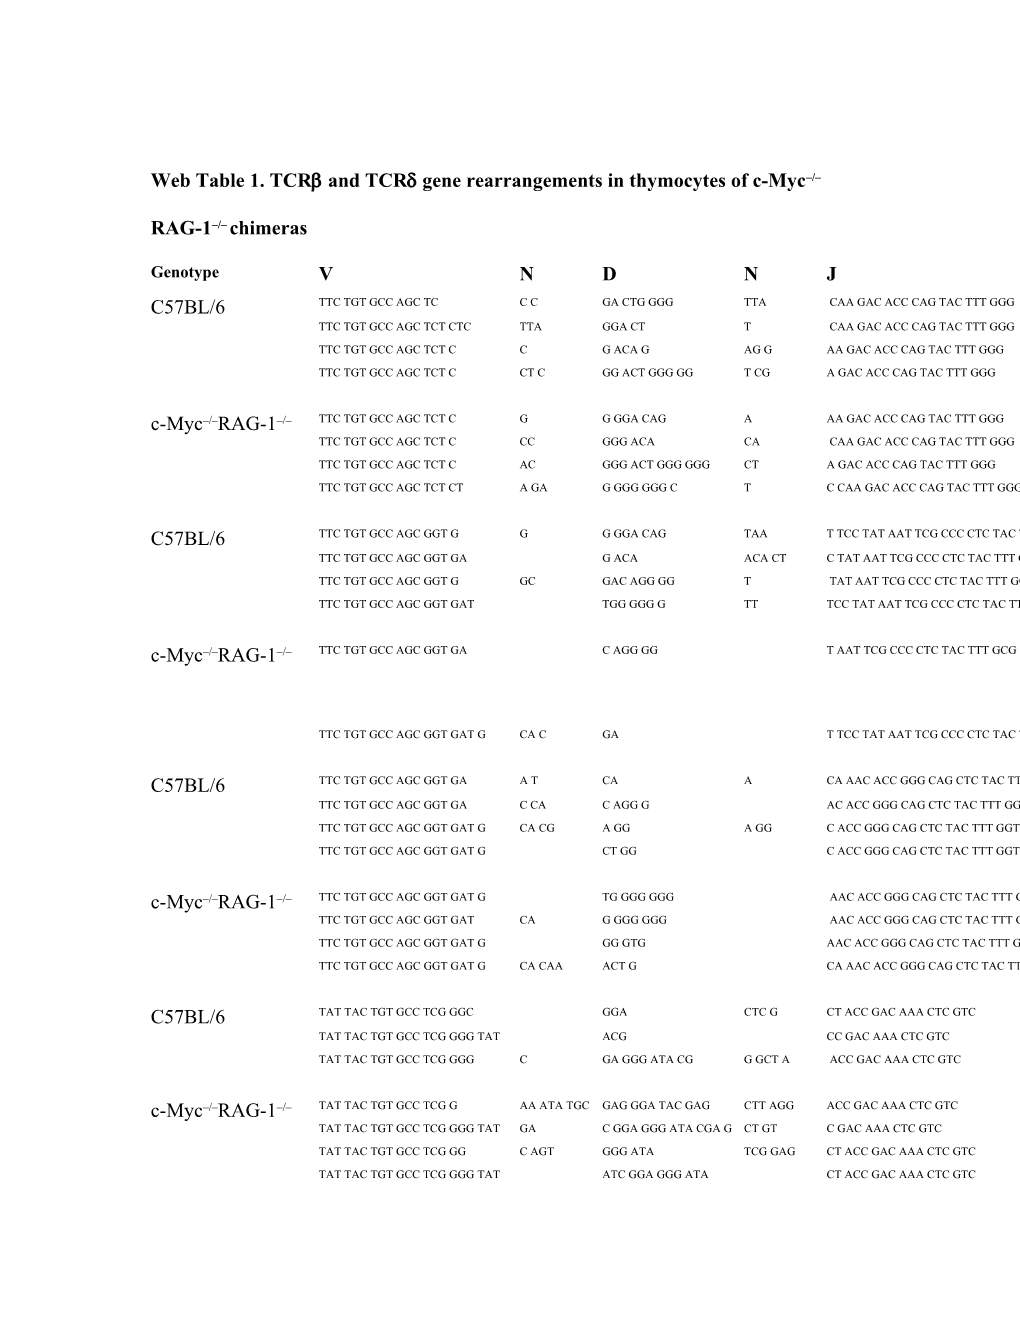 Web Table 1. TCR and TCR Gene Rearrangements in Thymocytes of C-Myc